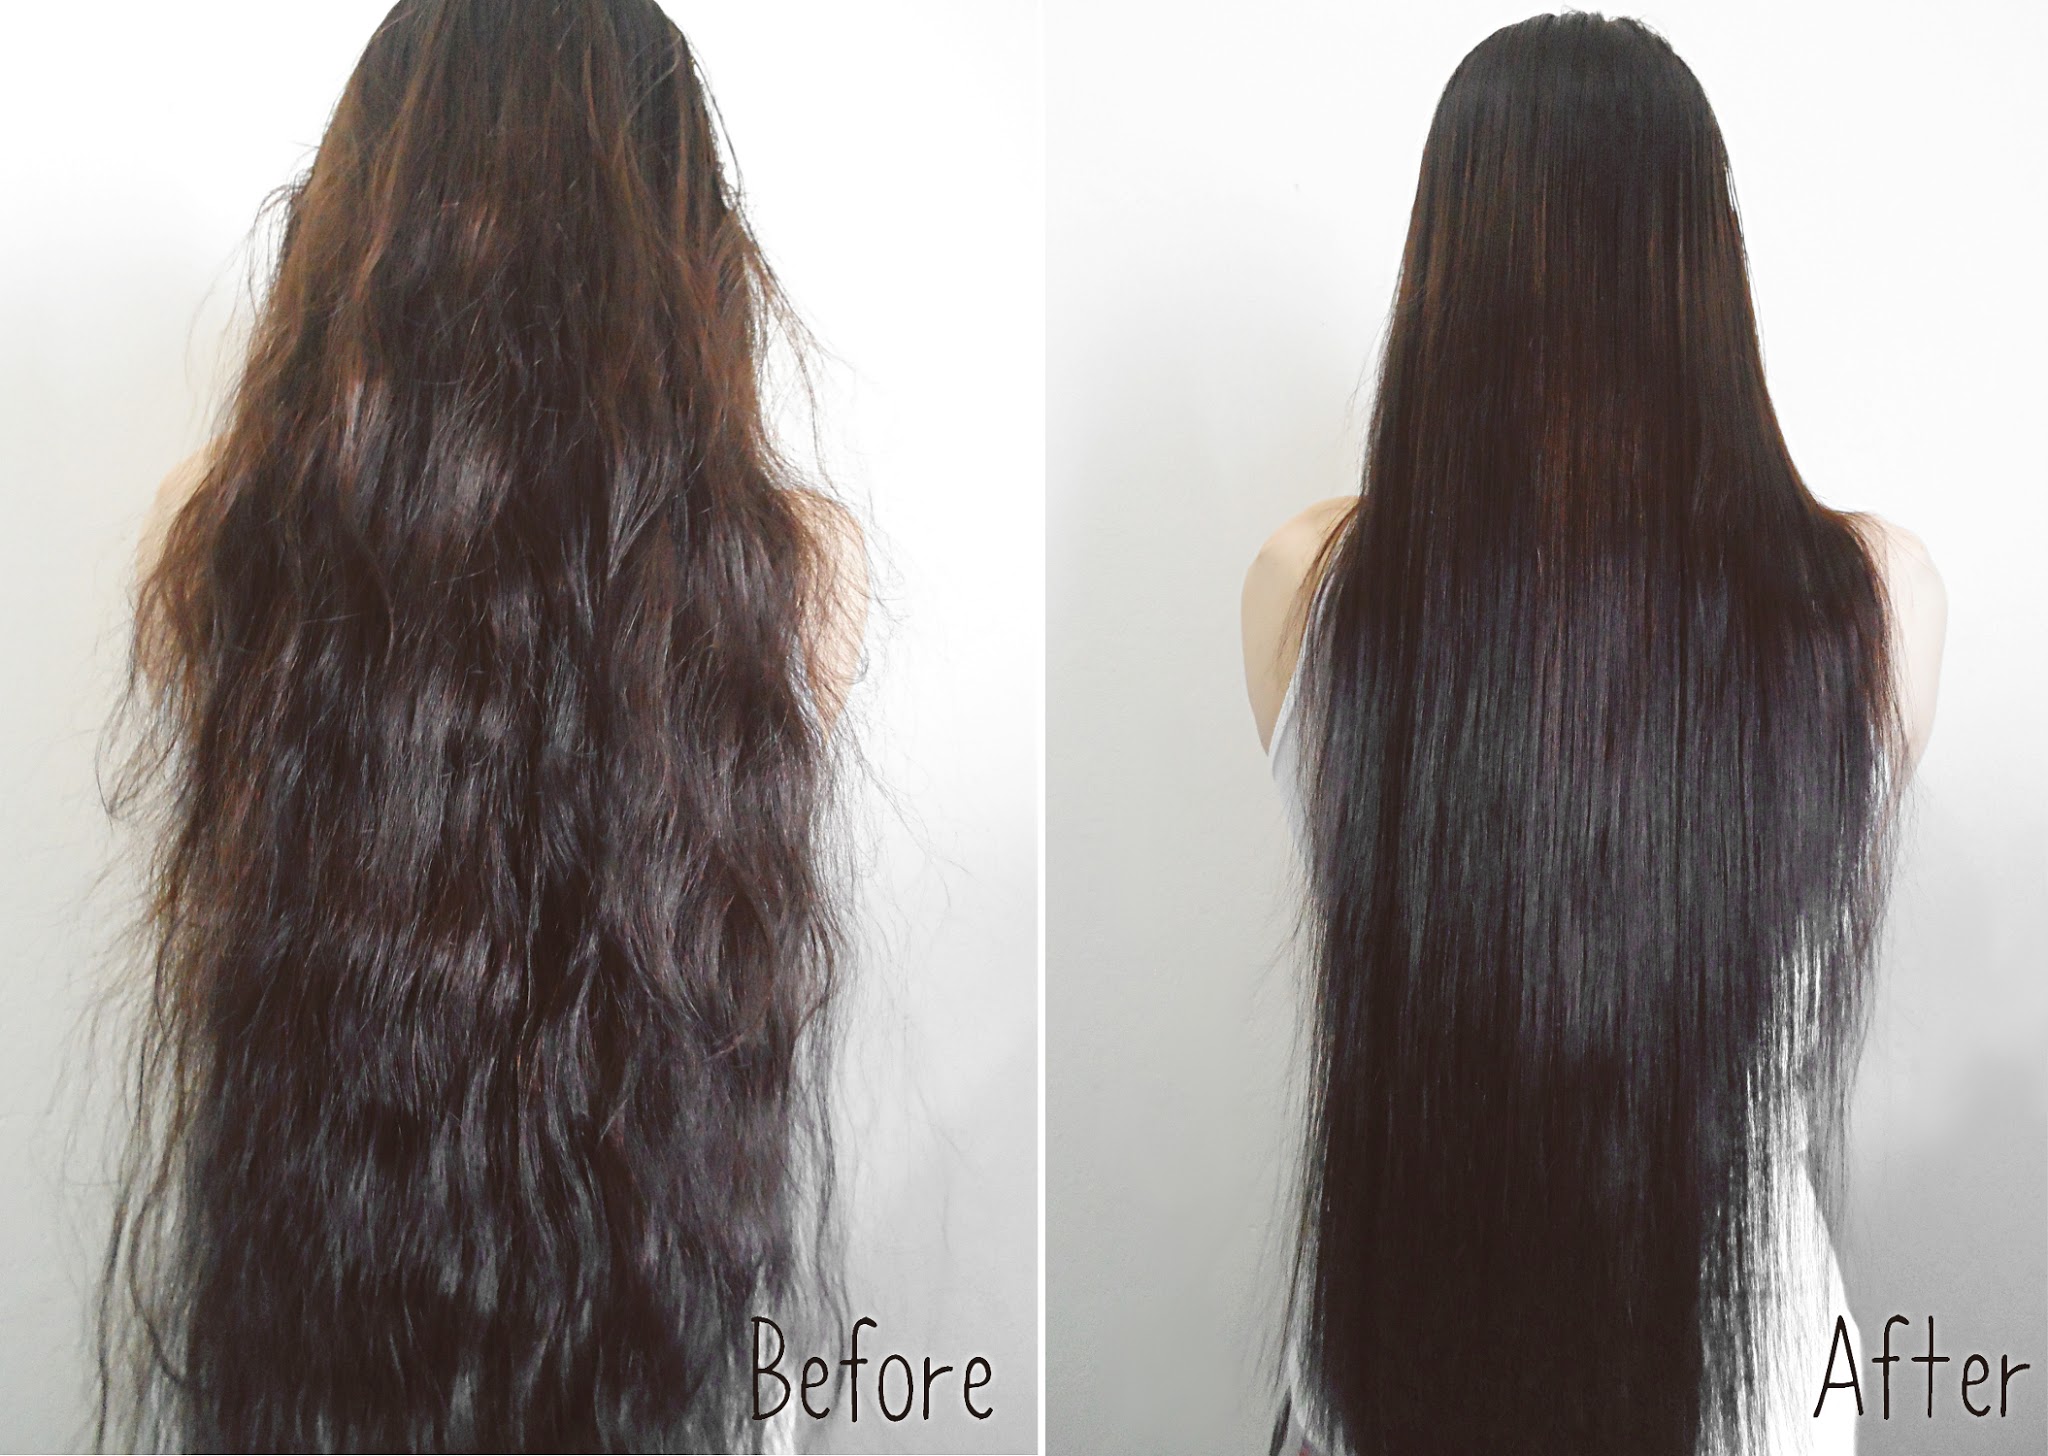 Irresistible Me flat iron review and demonstration by blogger with before and after pictures